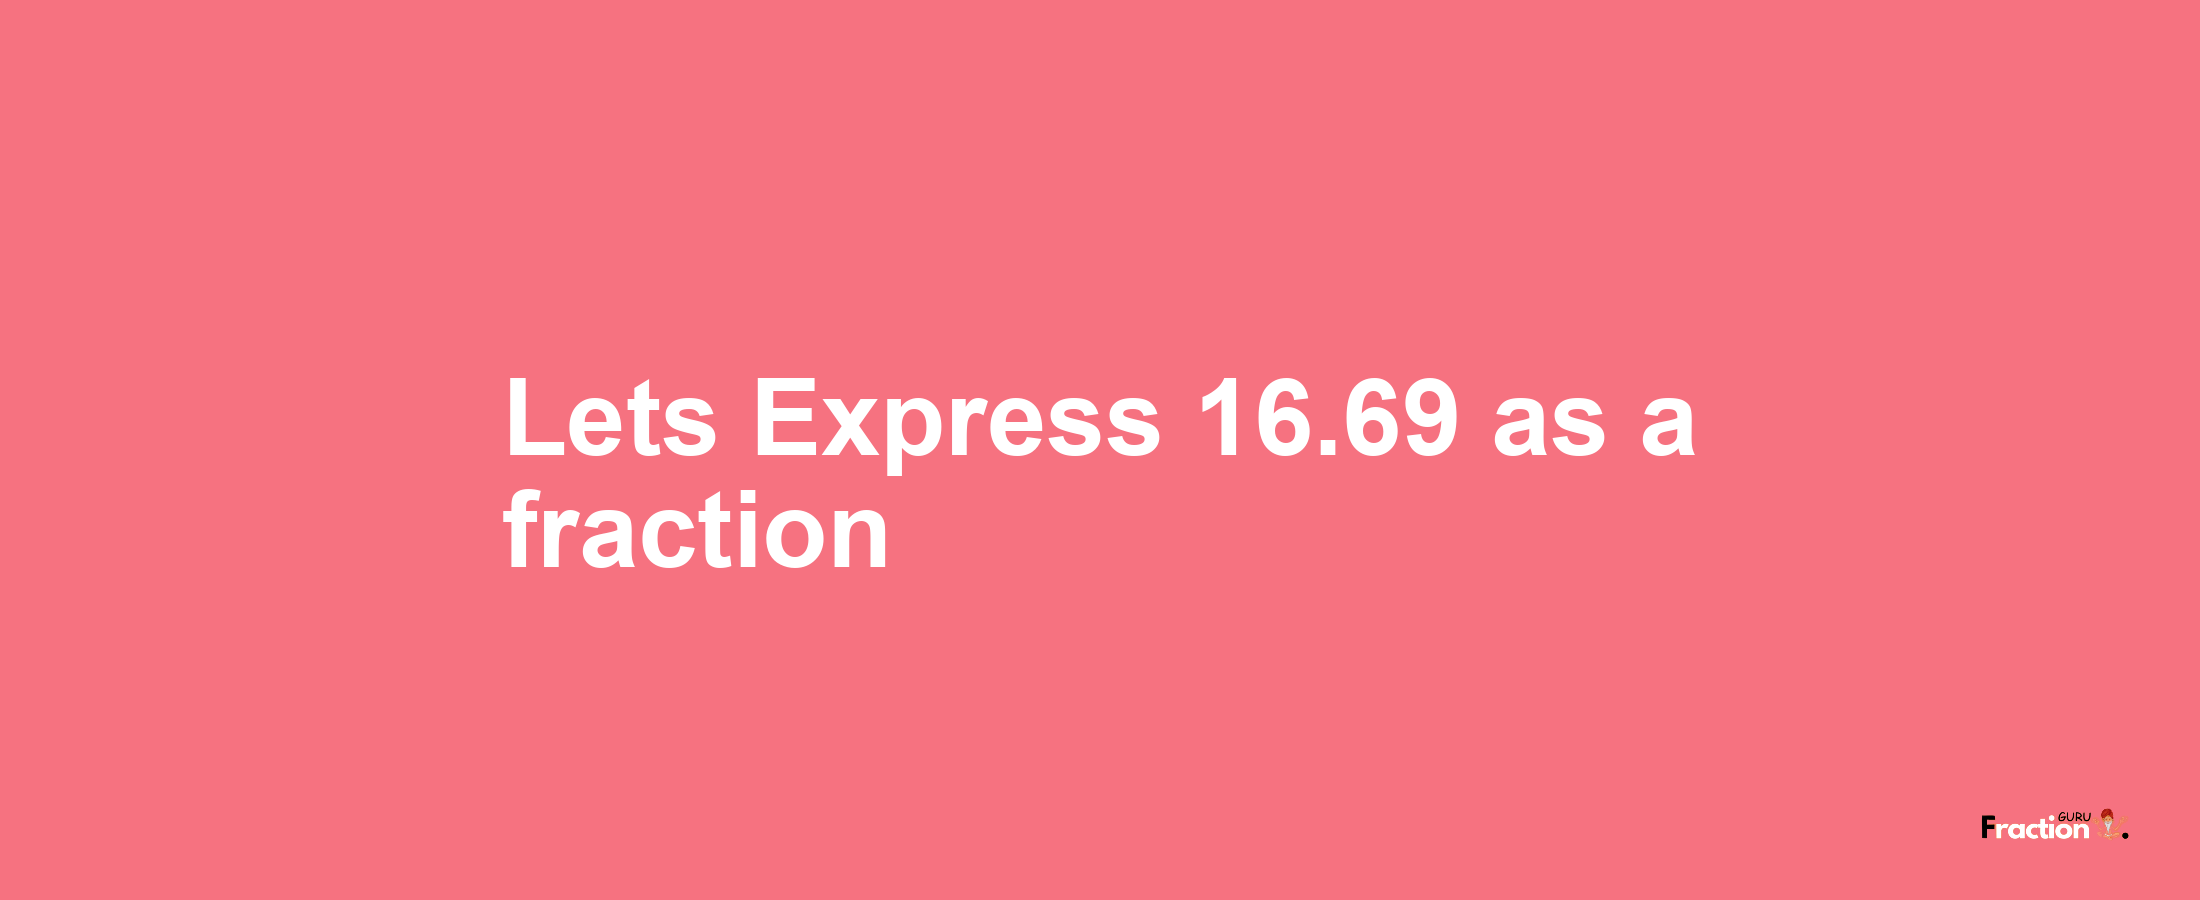 Lets Express 16.69 as afraction